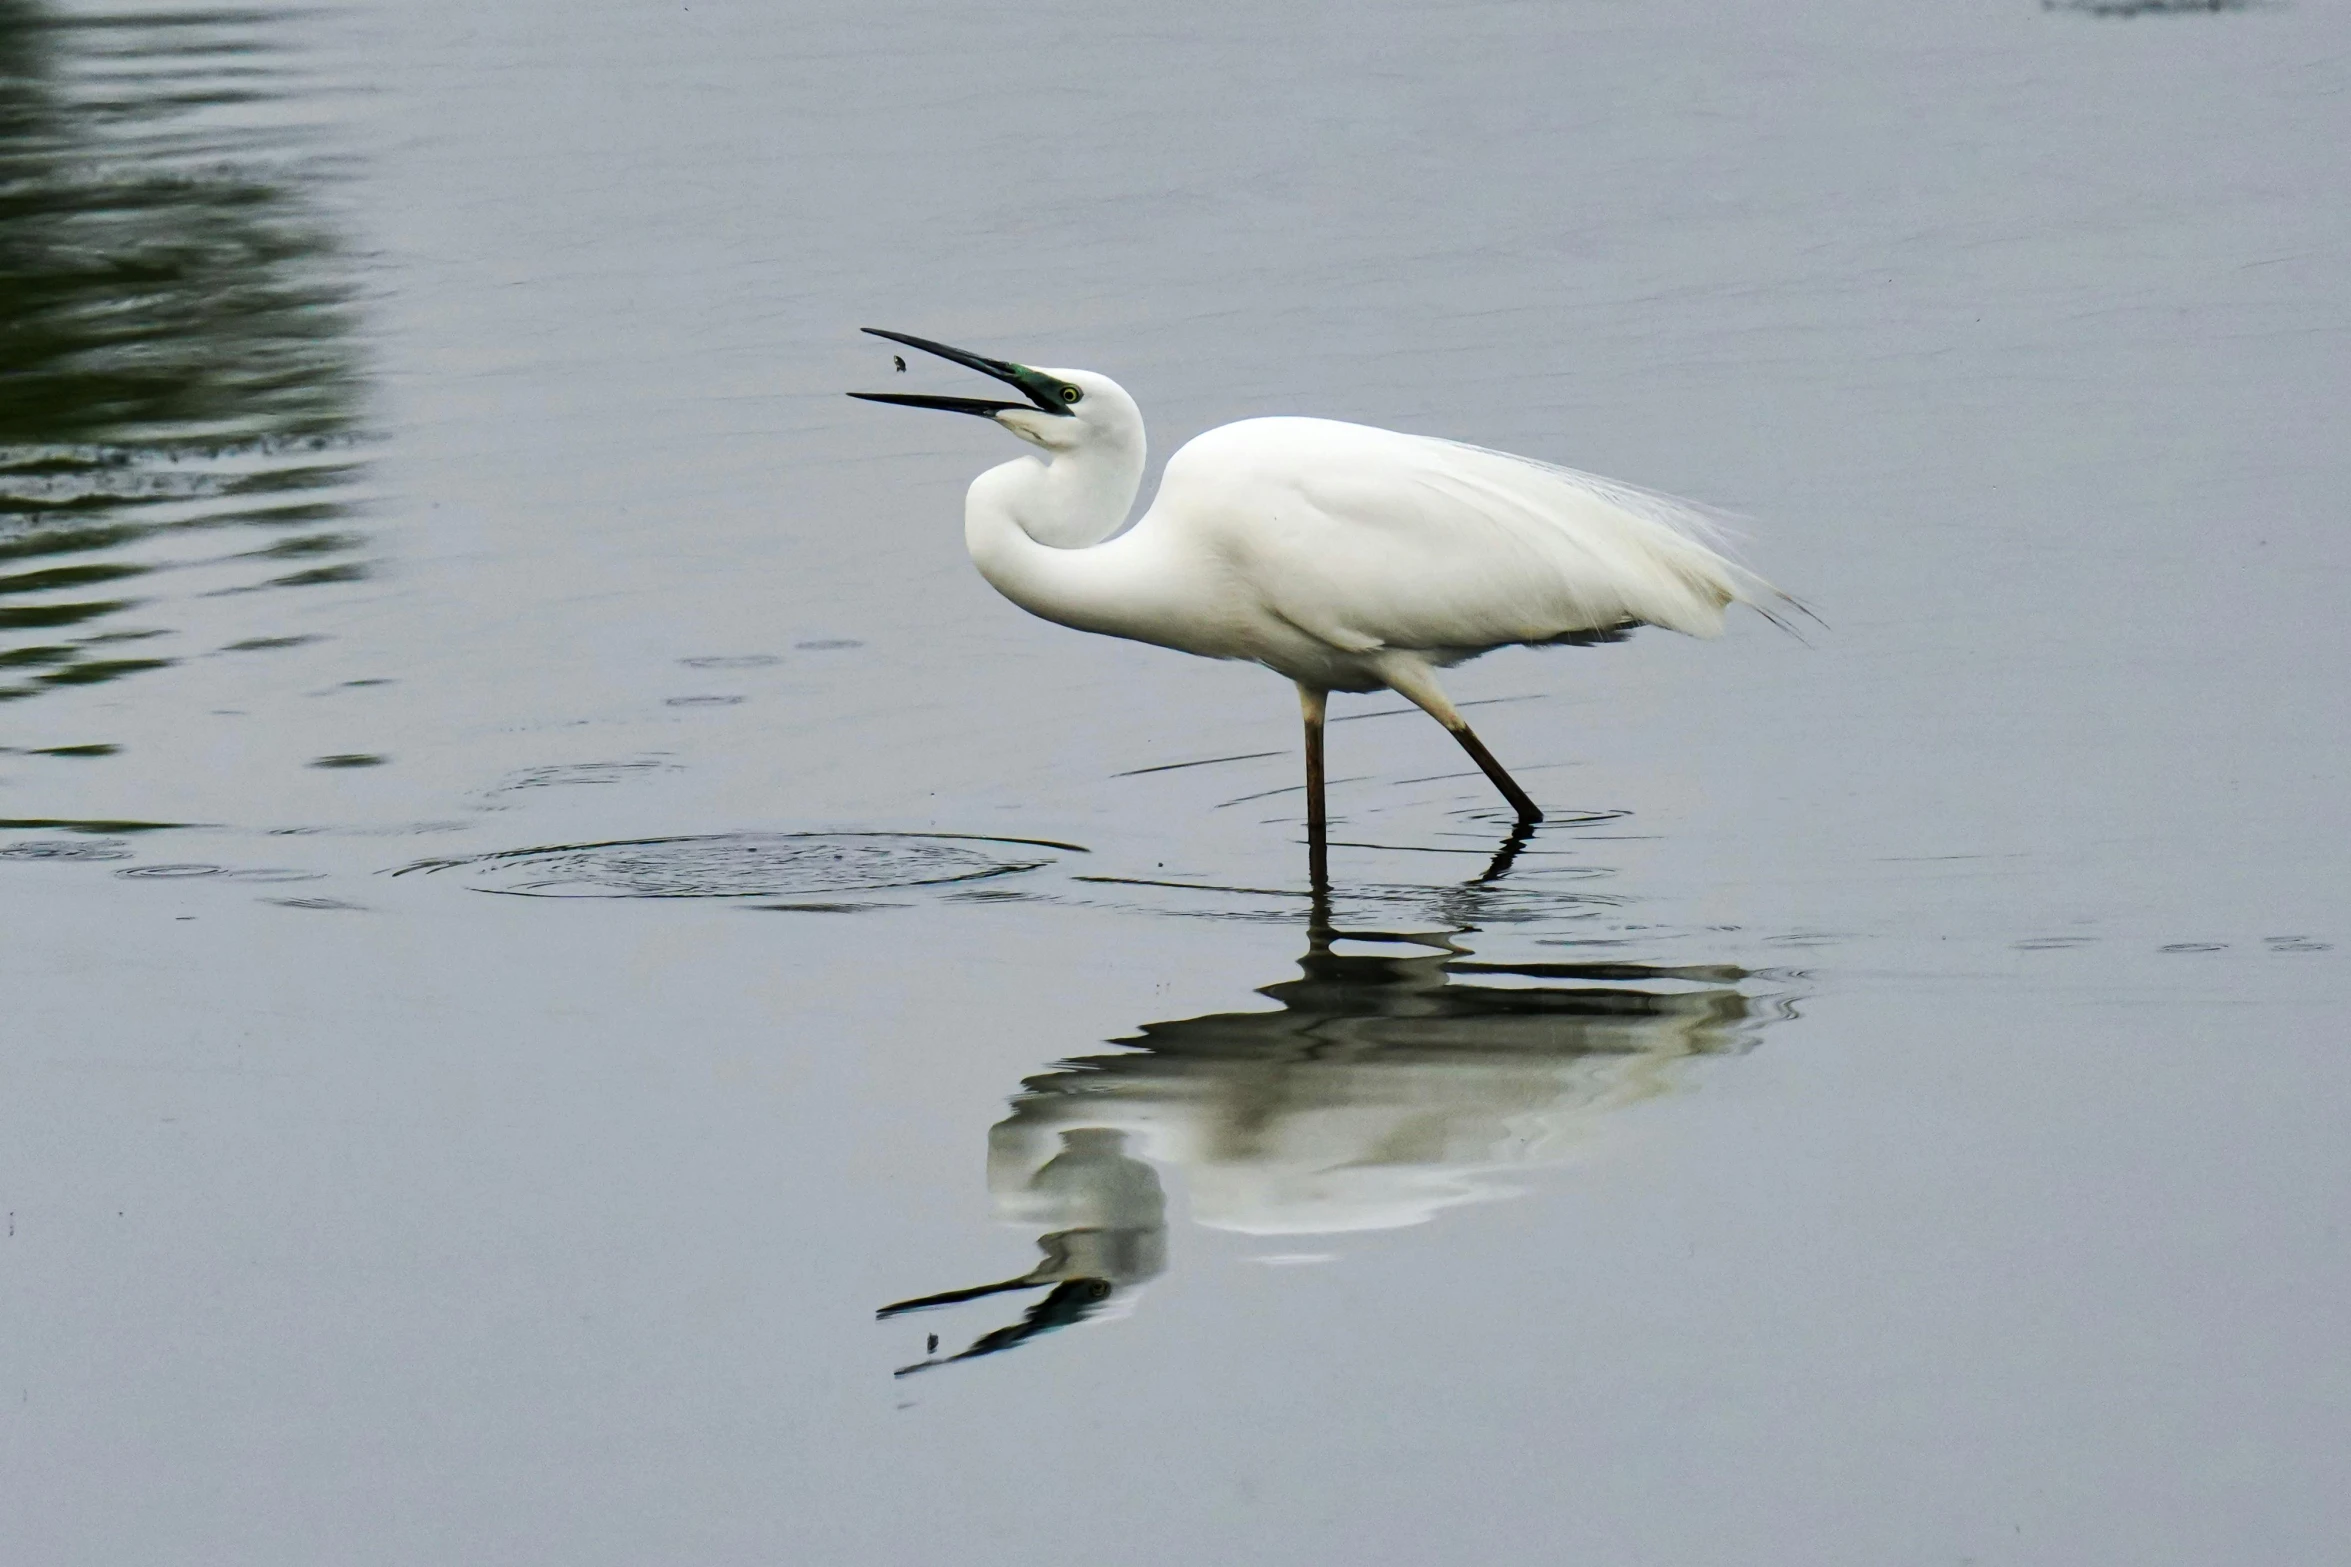 an egret walks along on the water in its natural habitat